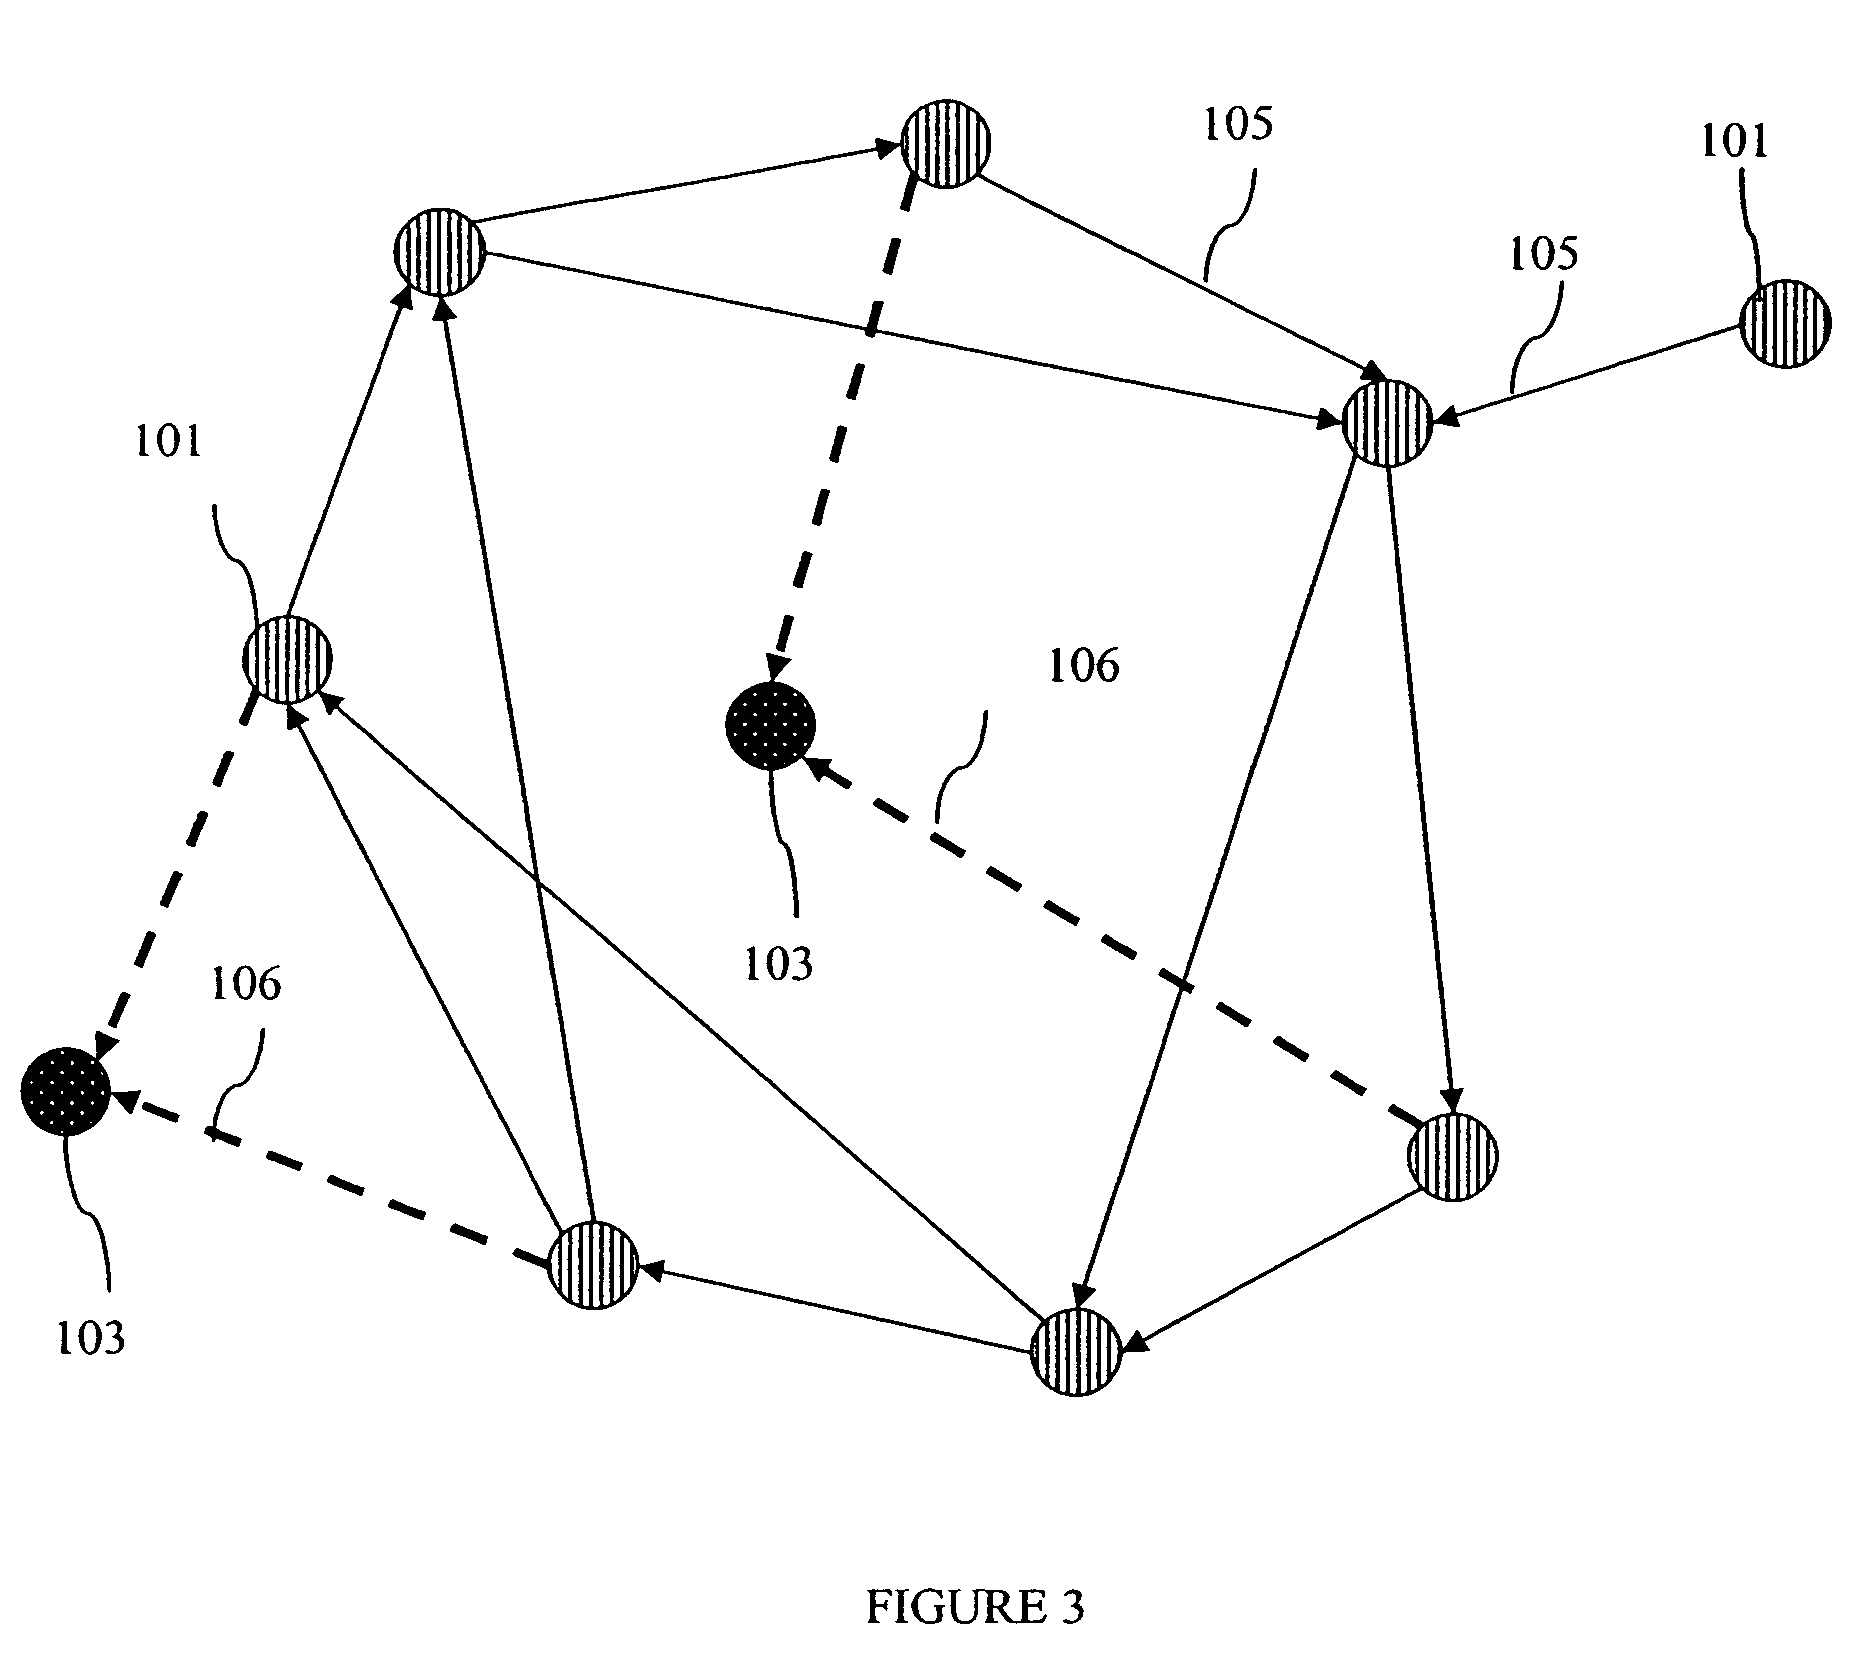 Digraph based mesh communication network